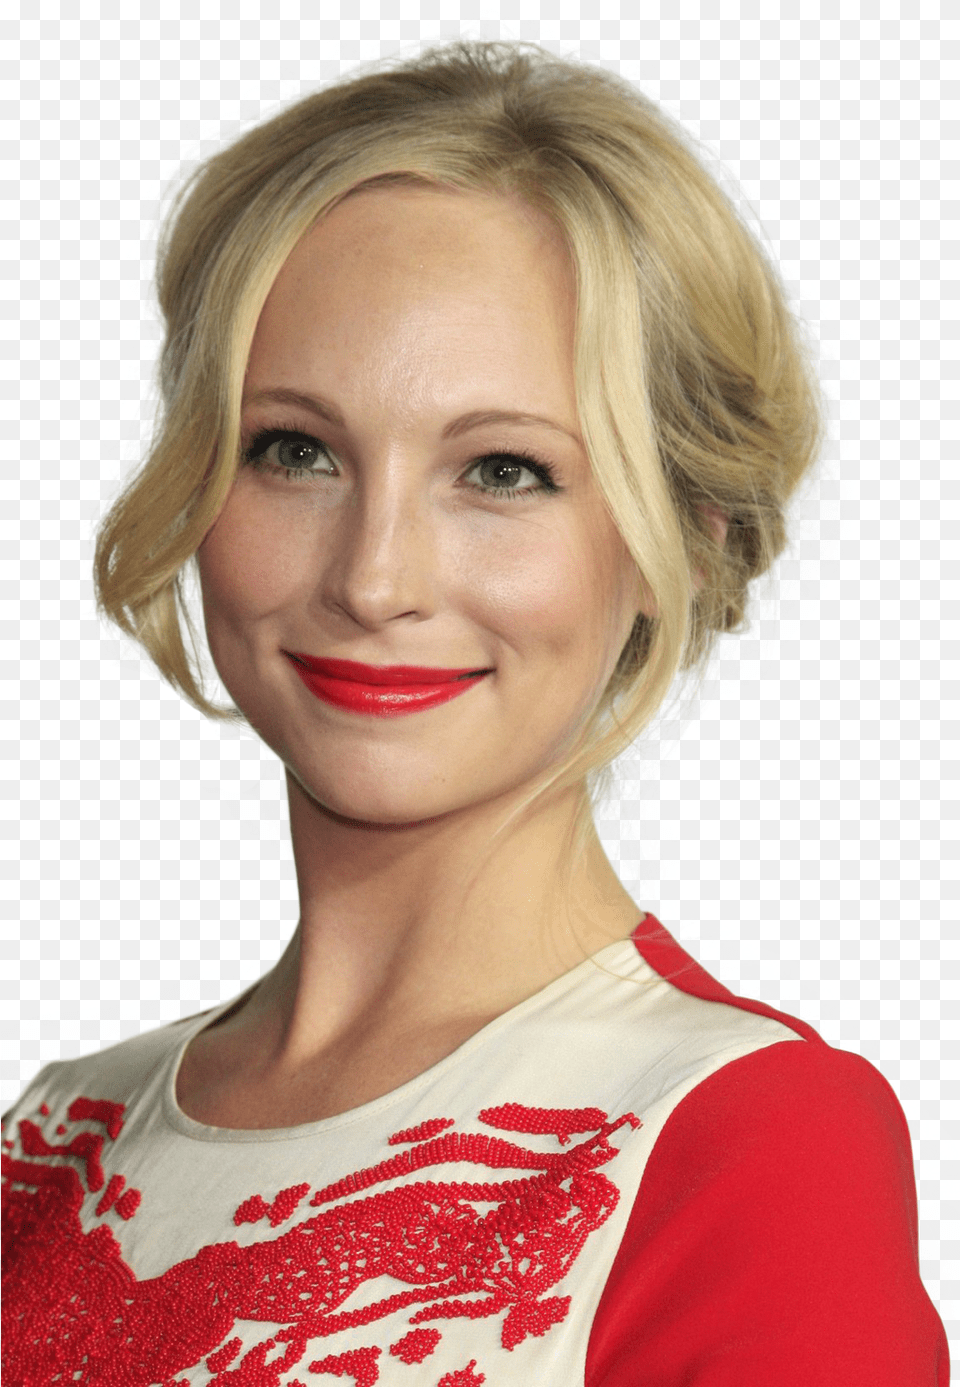 Candice Accola Hairstyles Portable Network Graphics, Head, Blonde, Face, Portrait Png Image